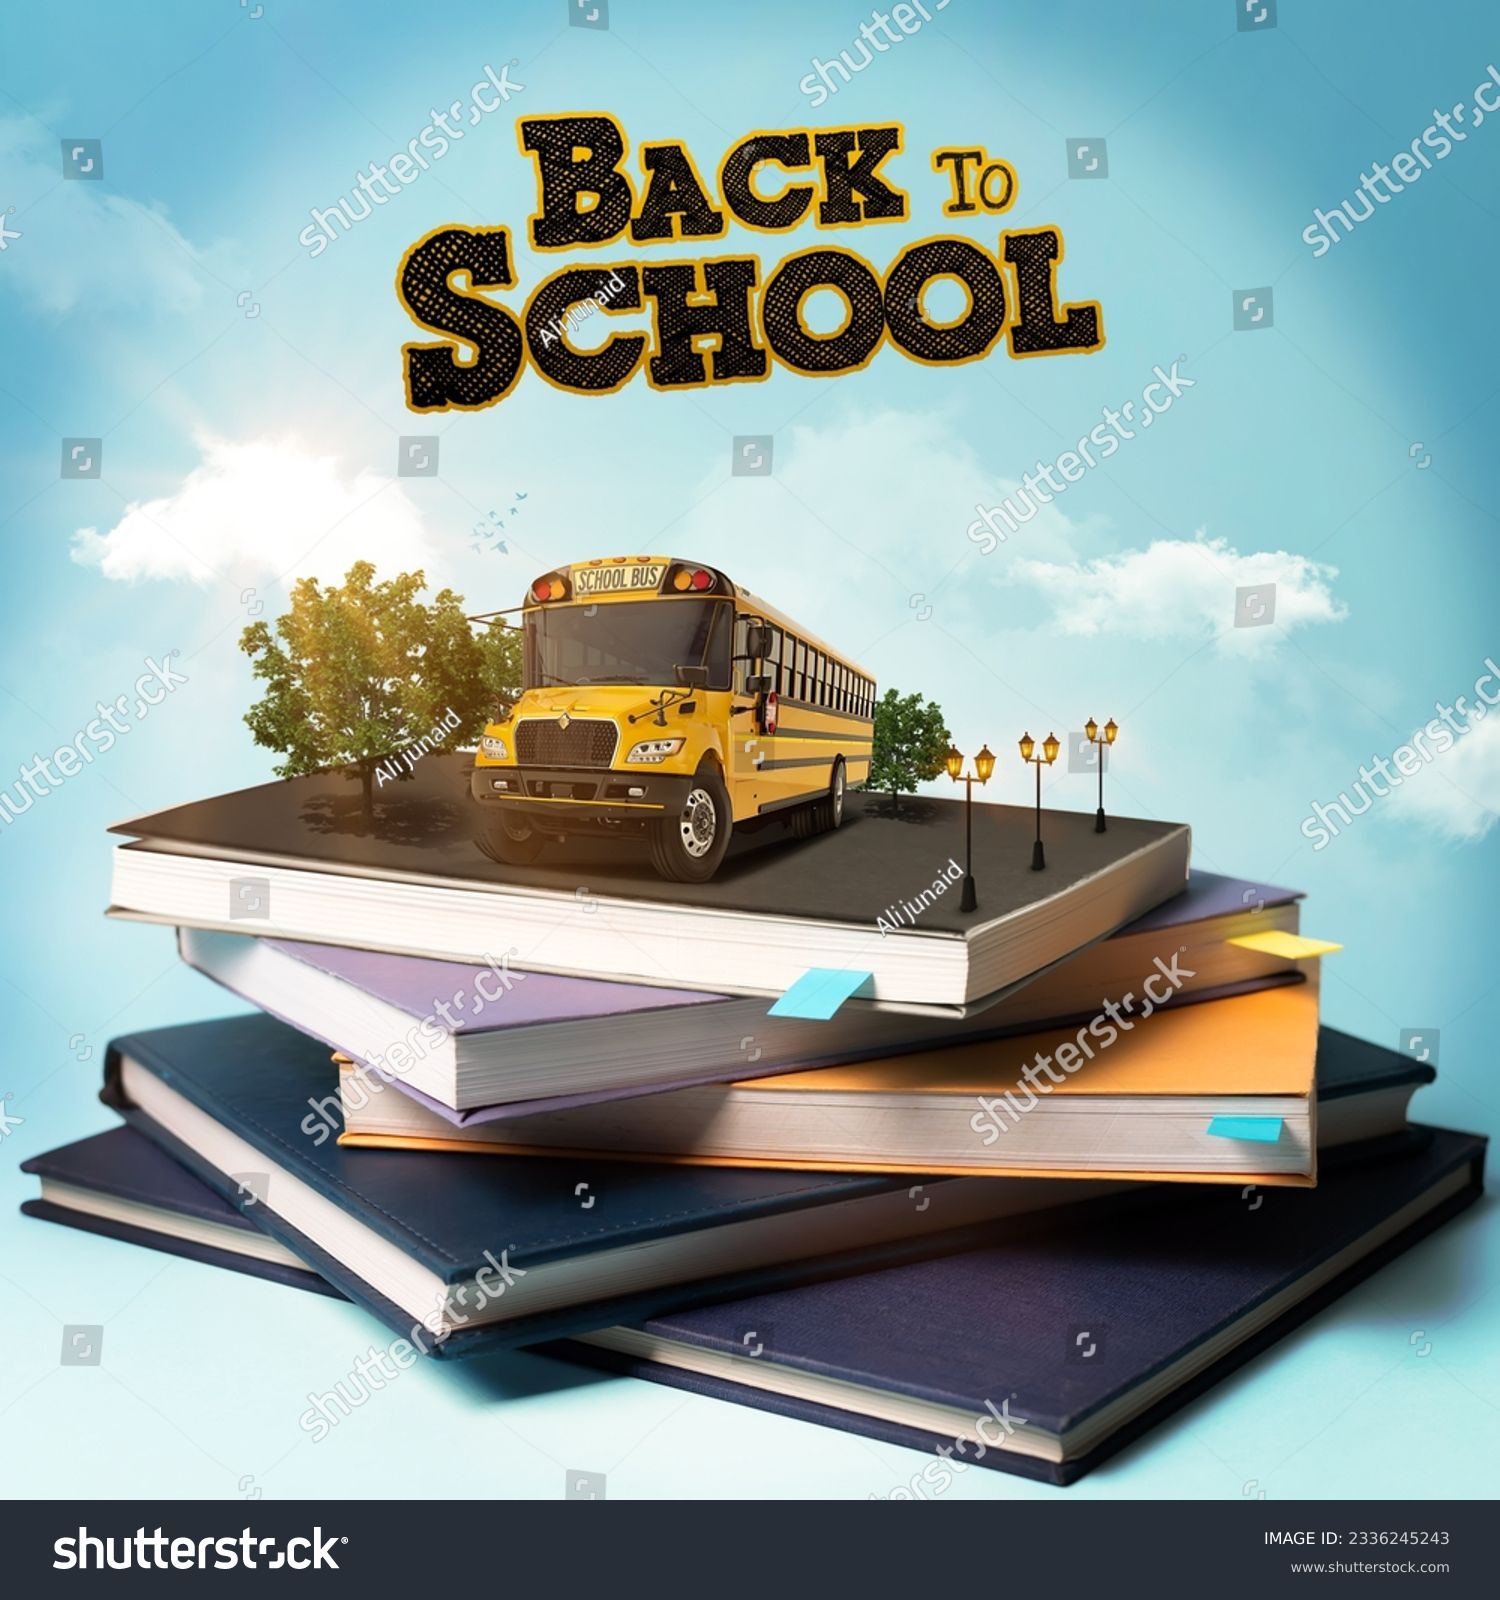 Back To School manipulation on cloudy background. #2336245243